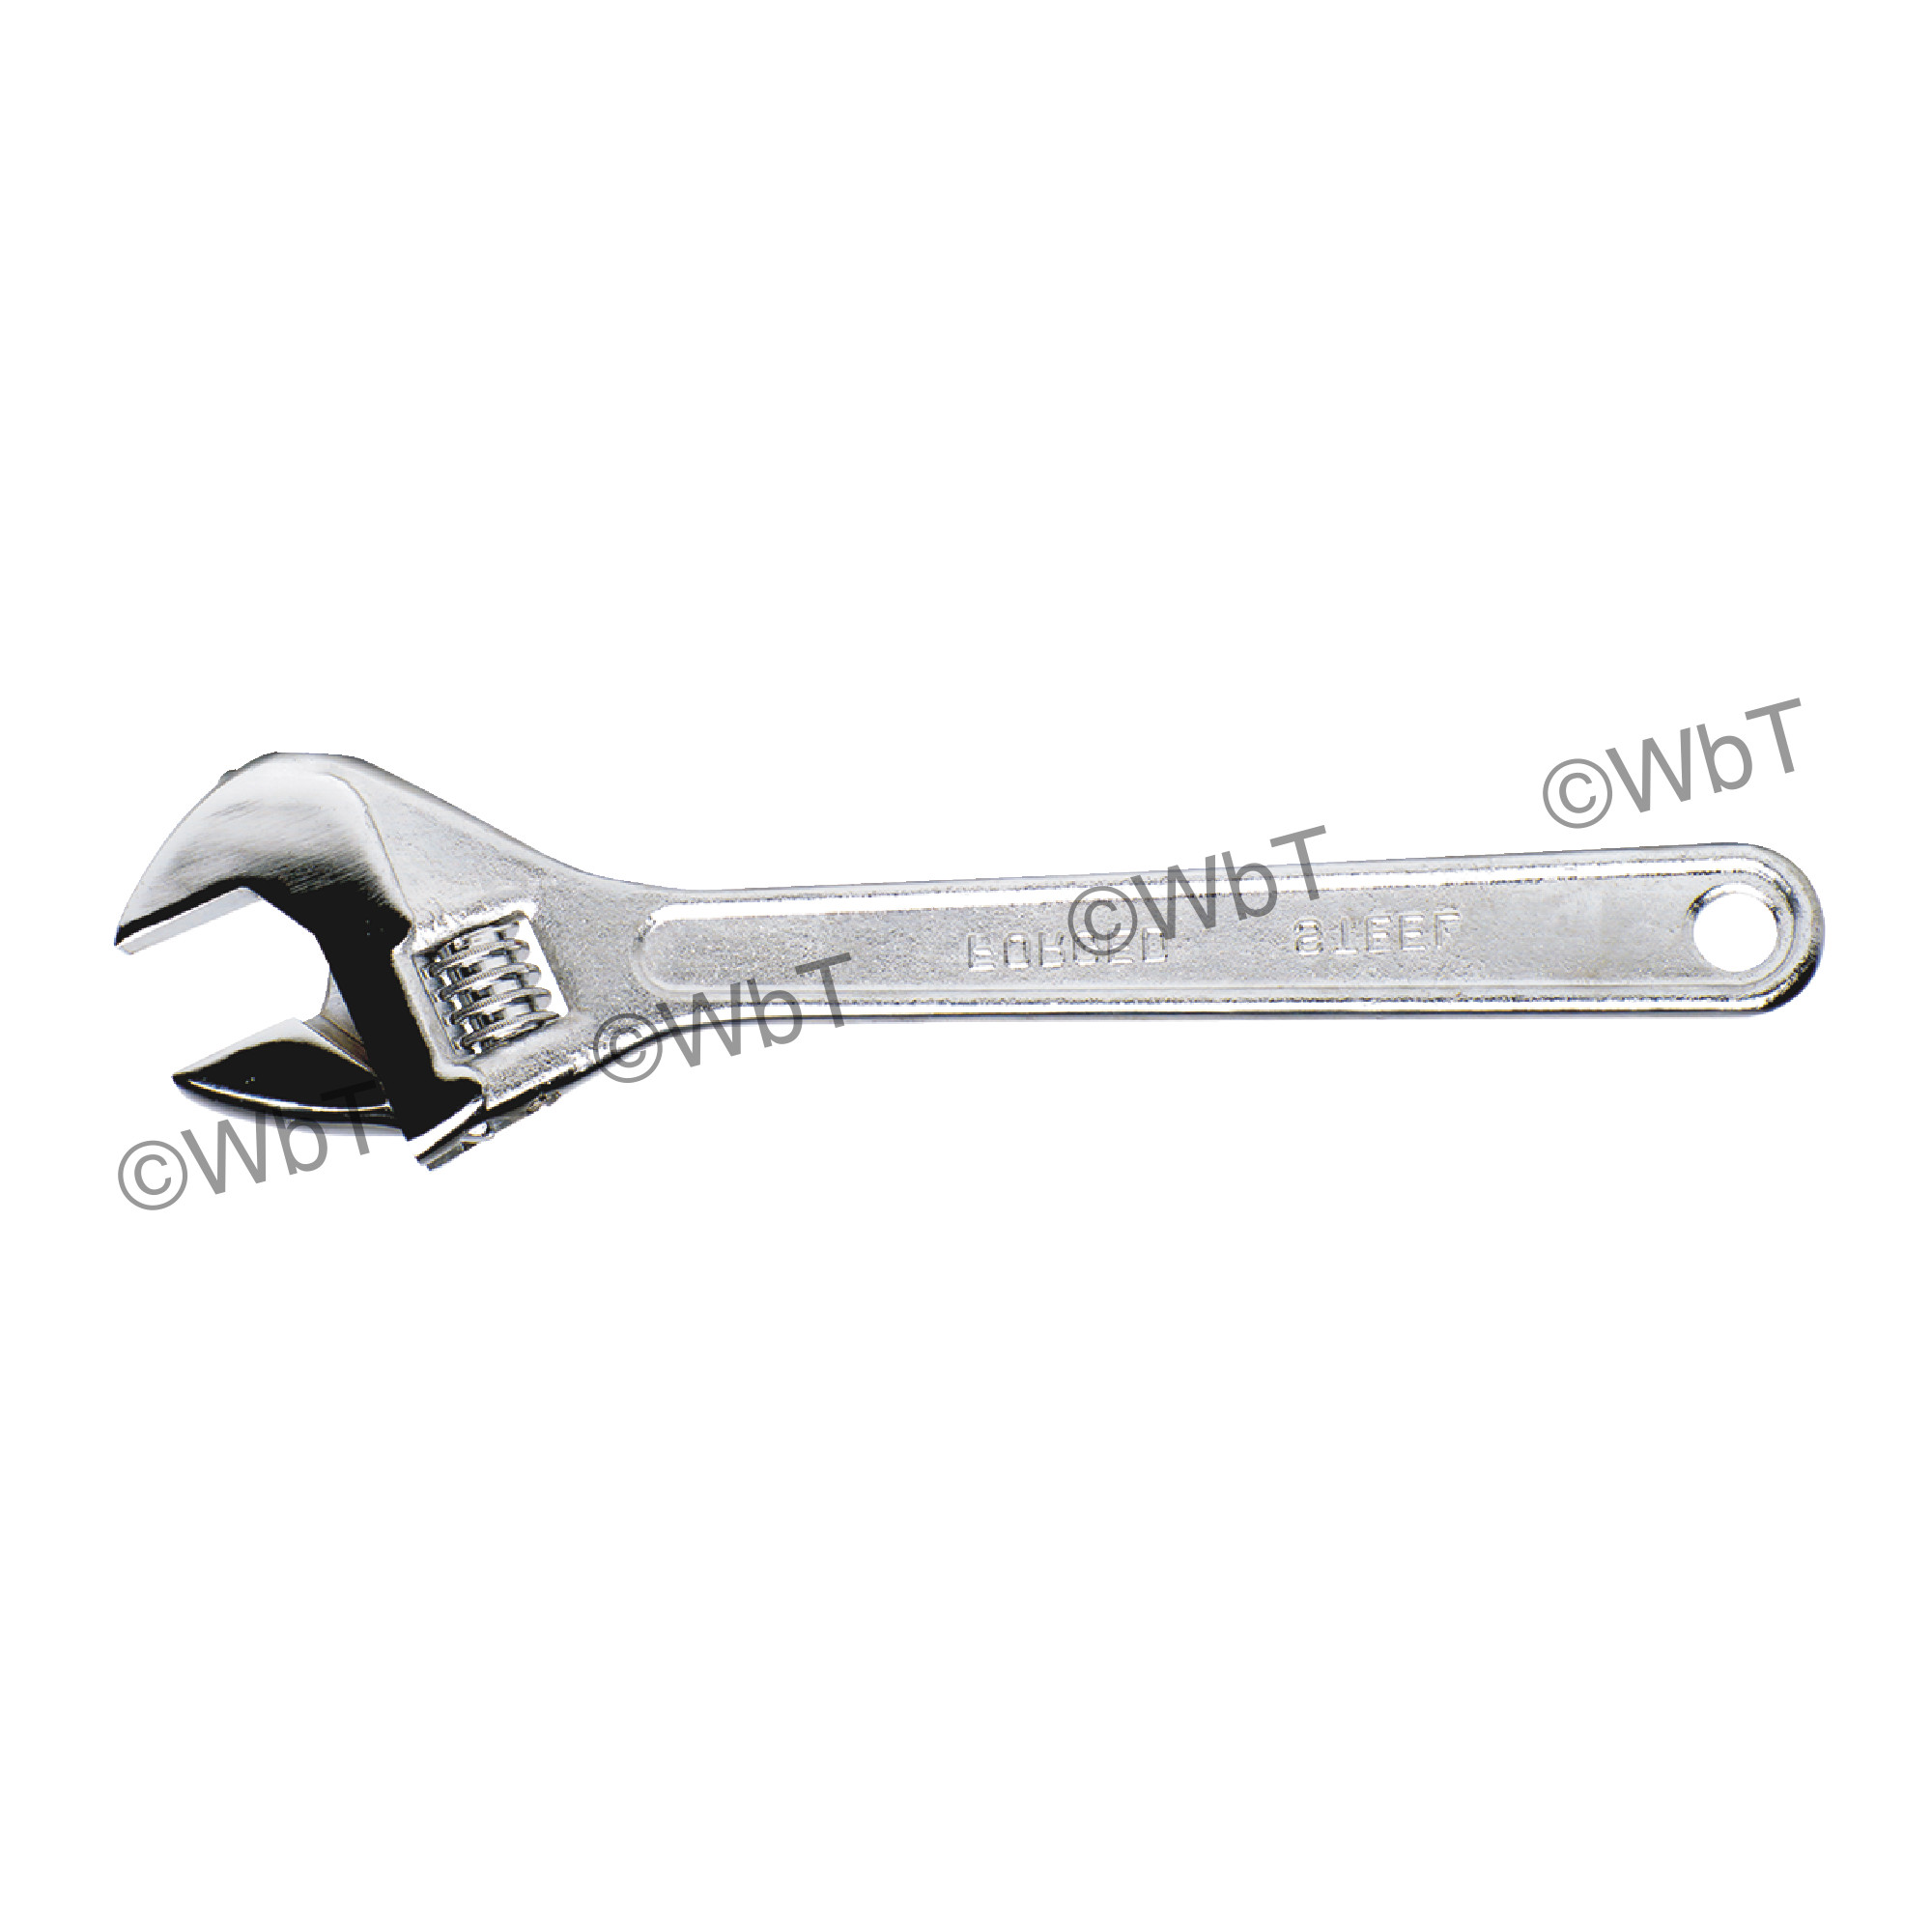 Adjustable Wrench - Model: 5217   SIZE: 15"   Capacity: 1-11/16"